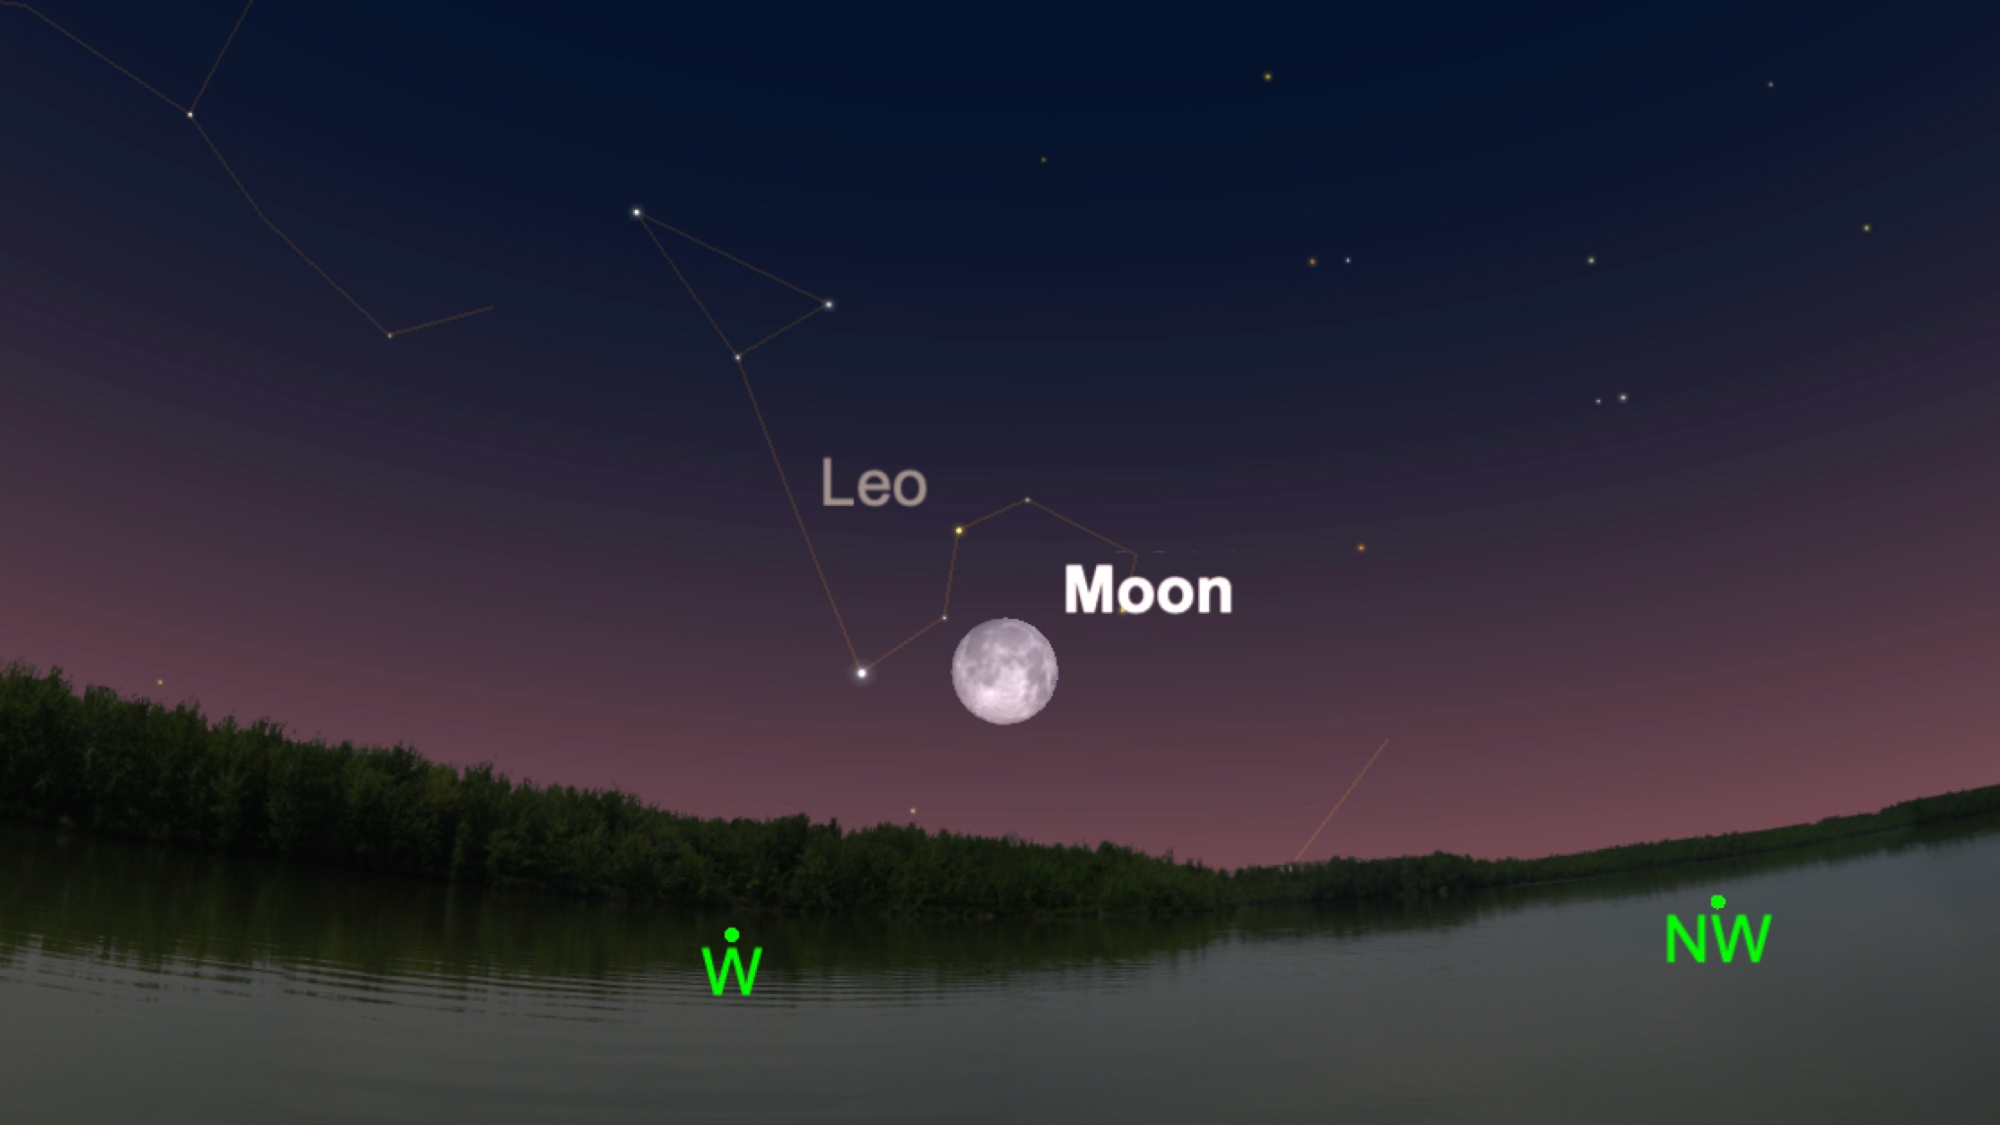 The February full moon will be in the constellation Leo, the lion.